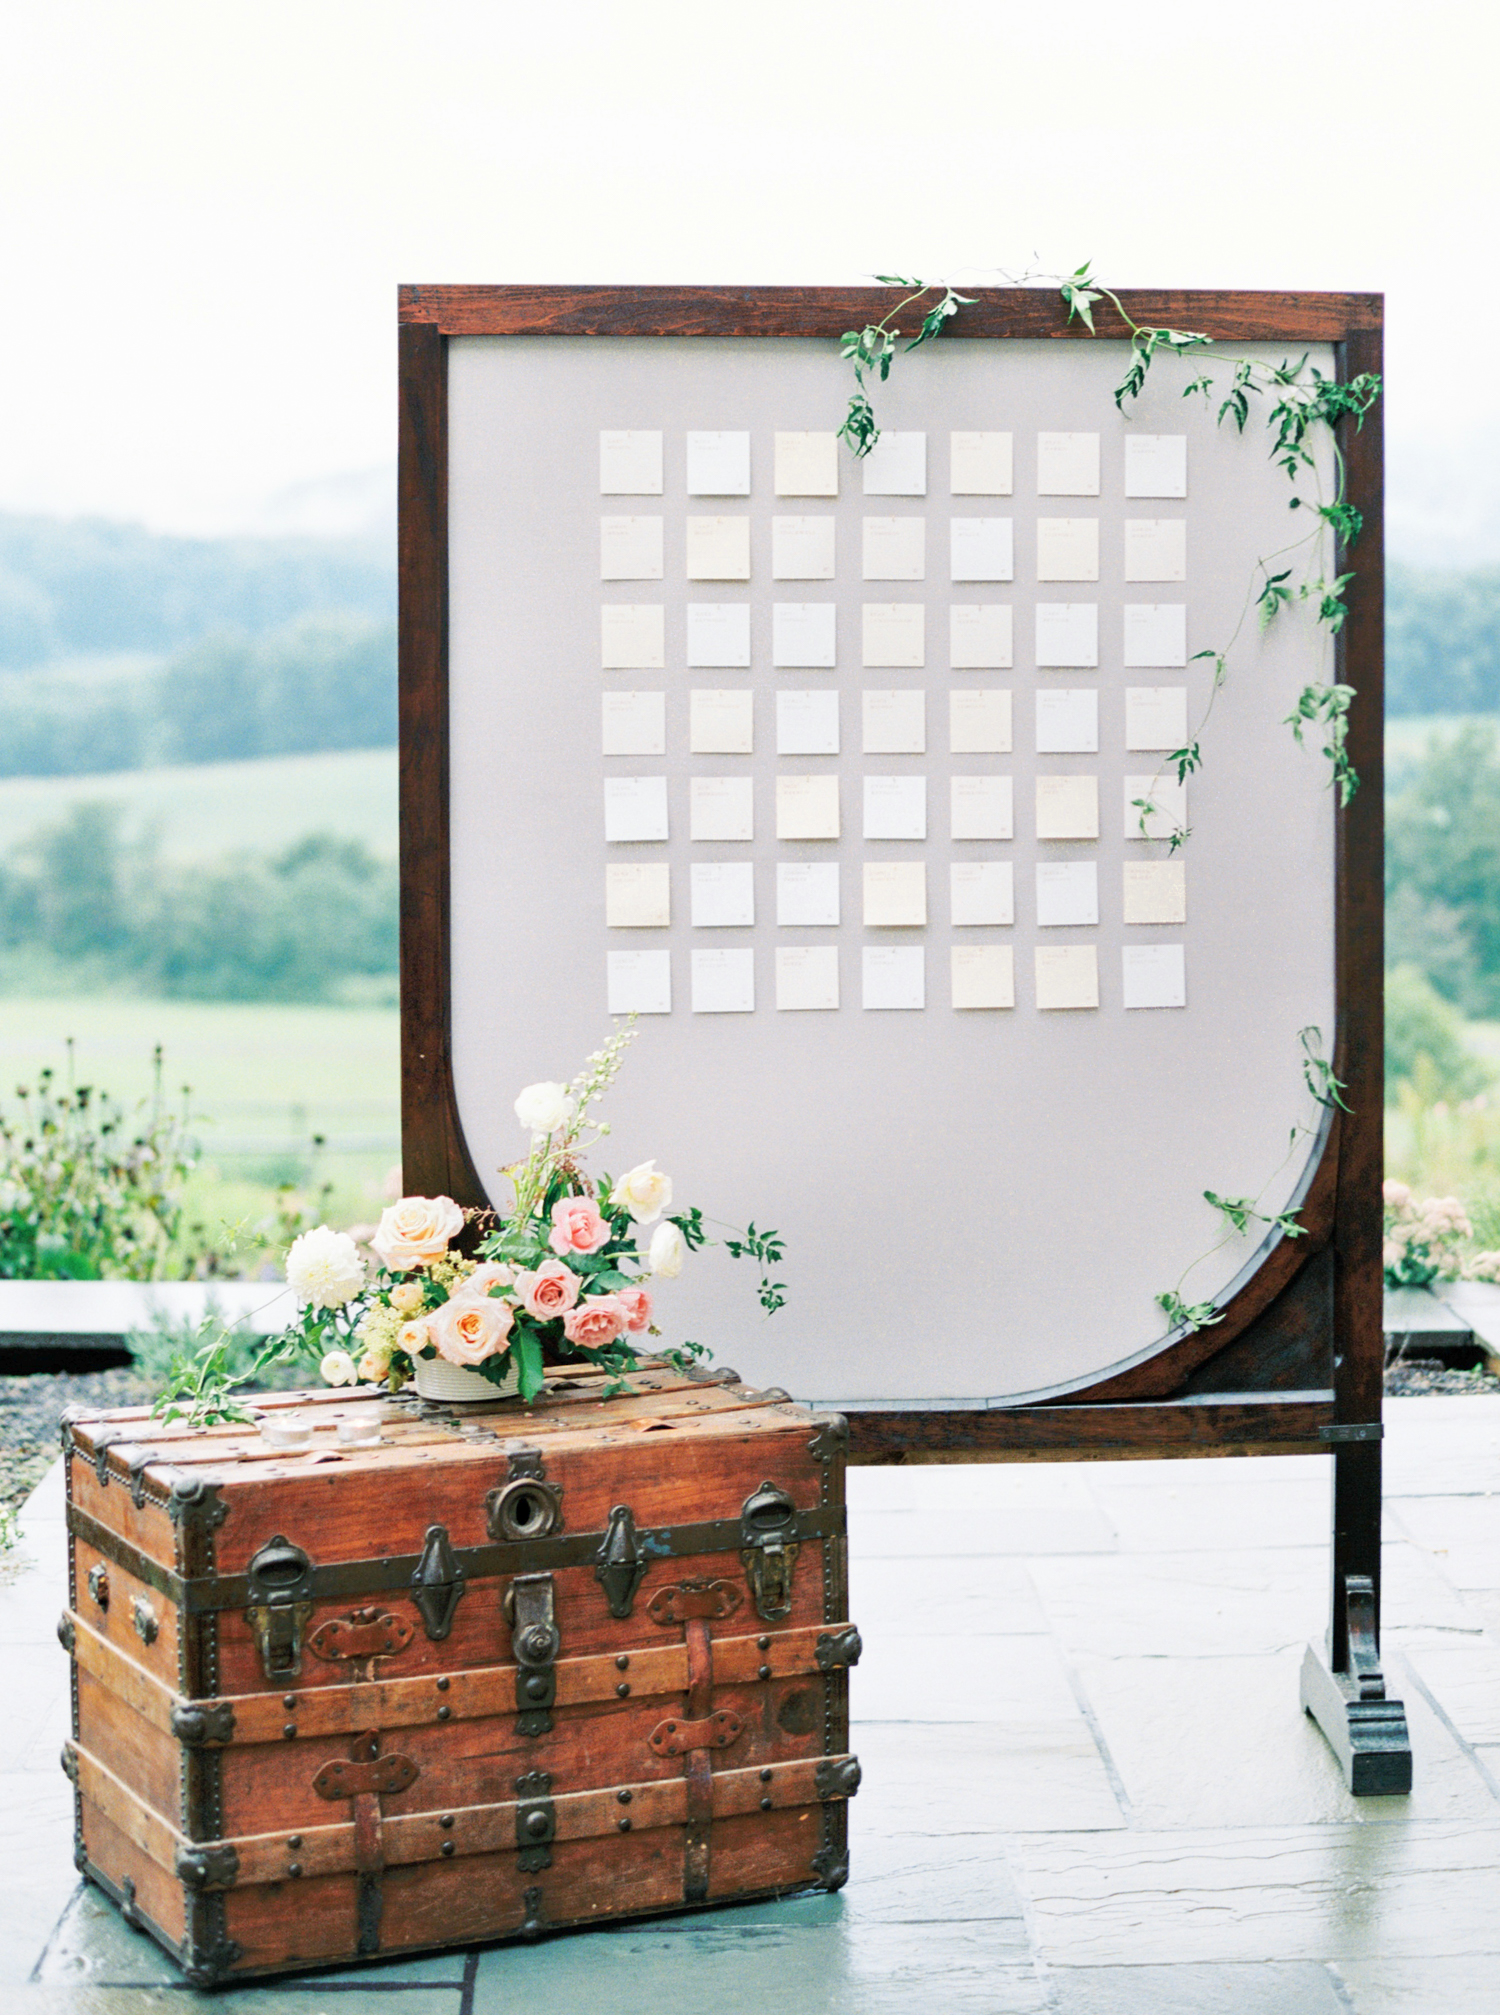 Pippin Hill Wedding Photos | Molly Carr Photography | Lauren Emerson Events | Pippin Hill Farm & Vineyard | Escort Card Display with Grey Backdrop and Greenery